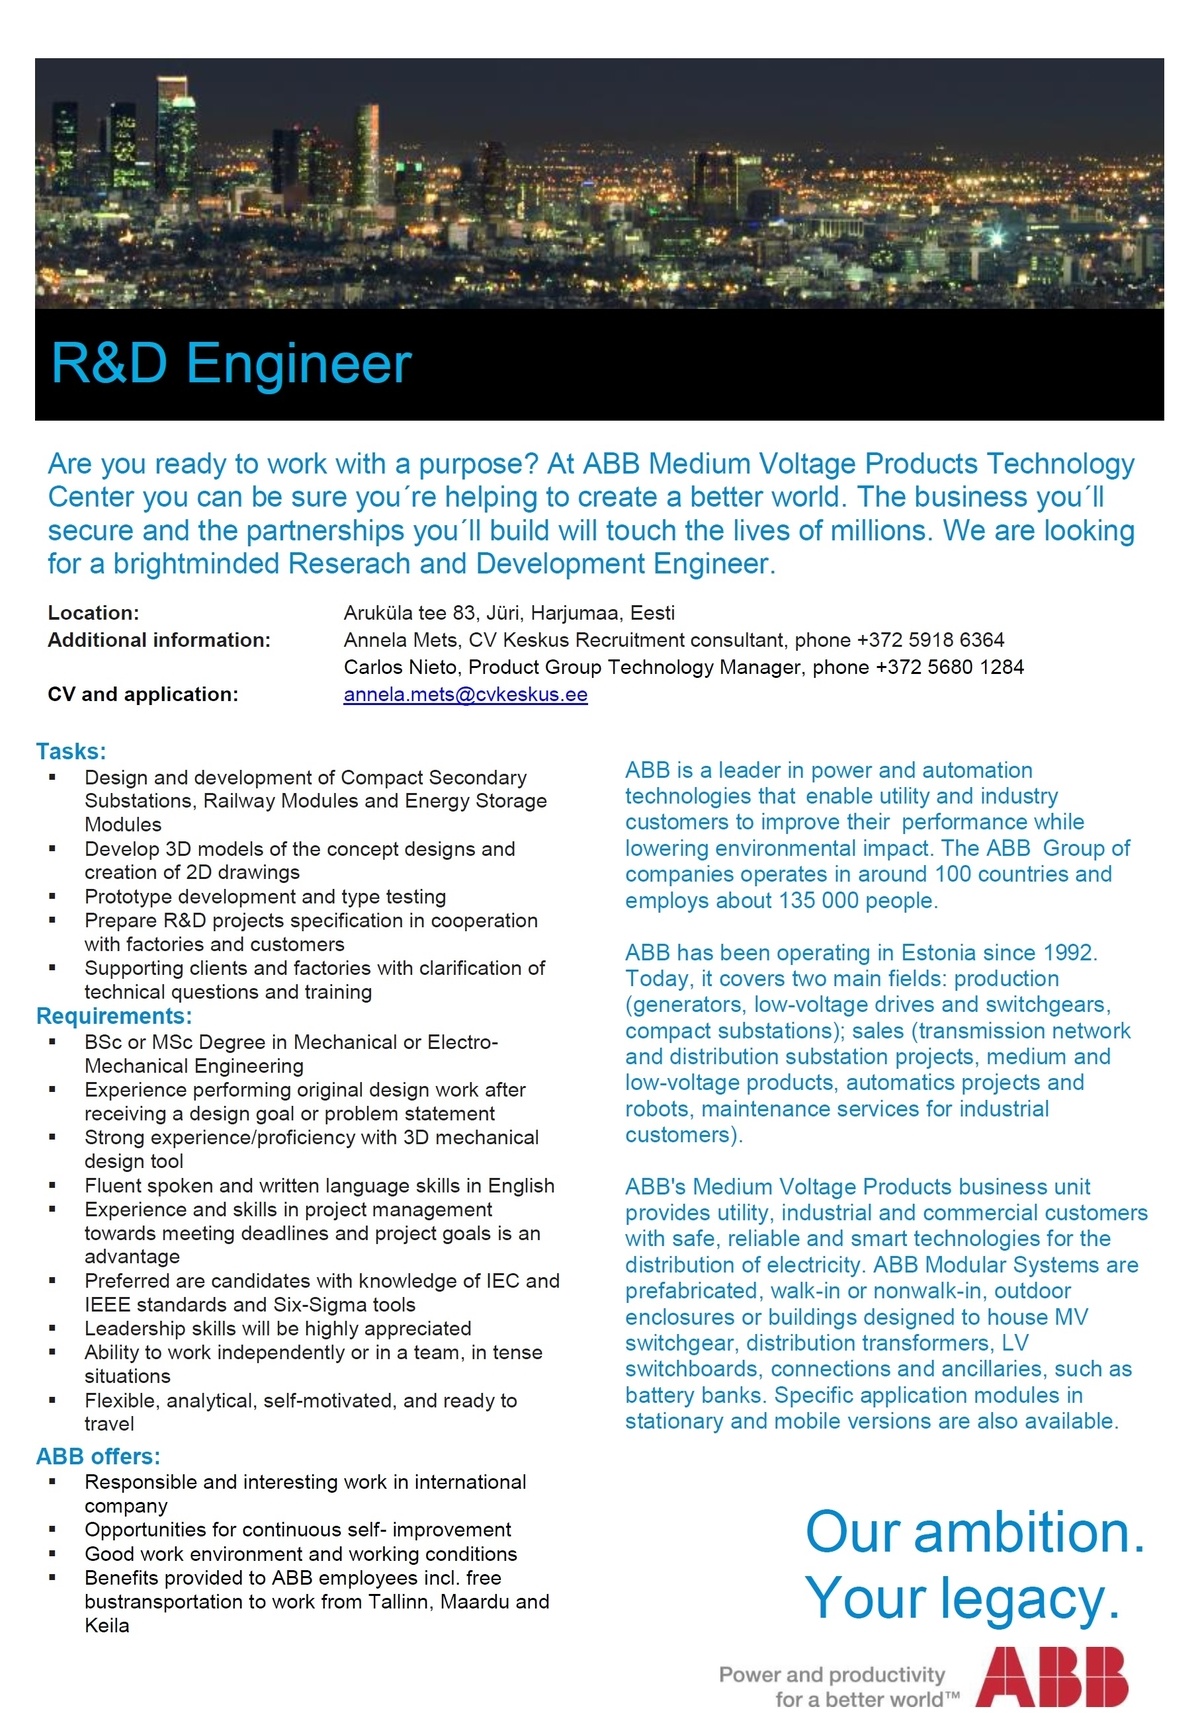 CV KESKUS OÜ ABB is looking for Research and Development Engineer